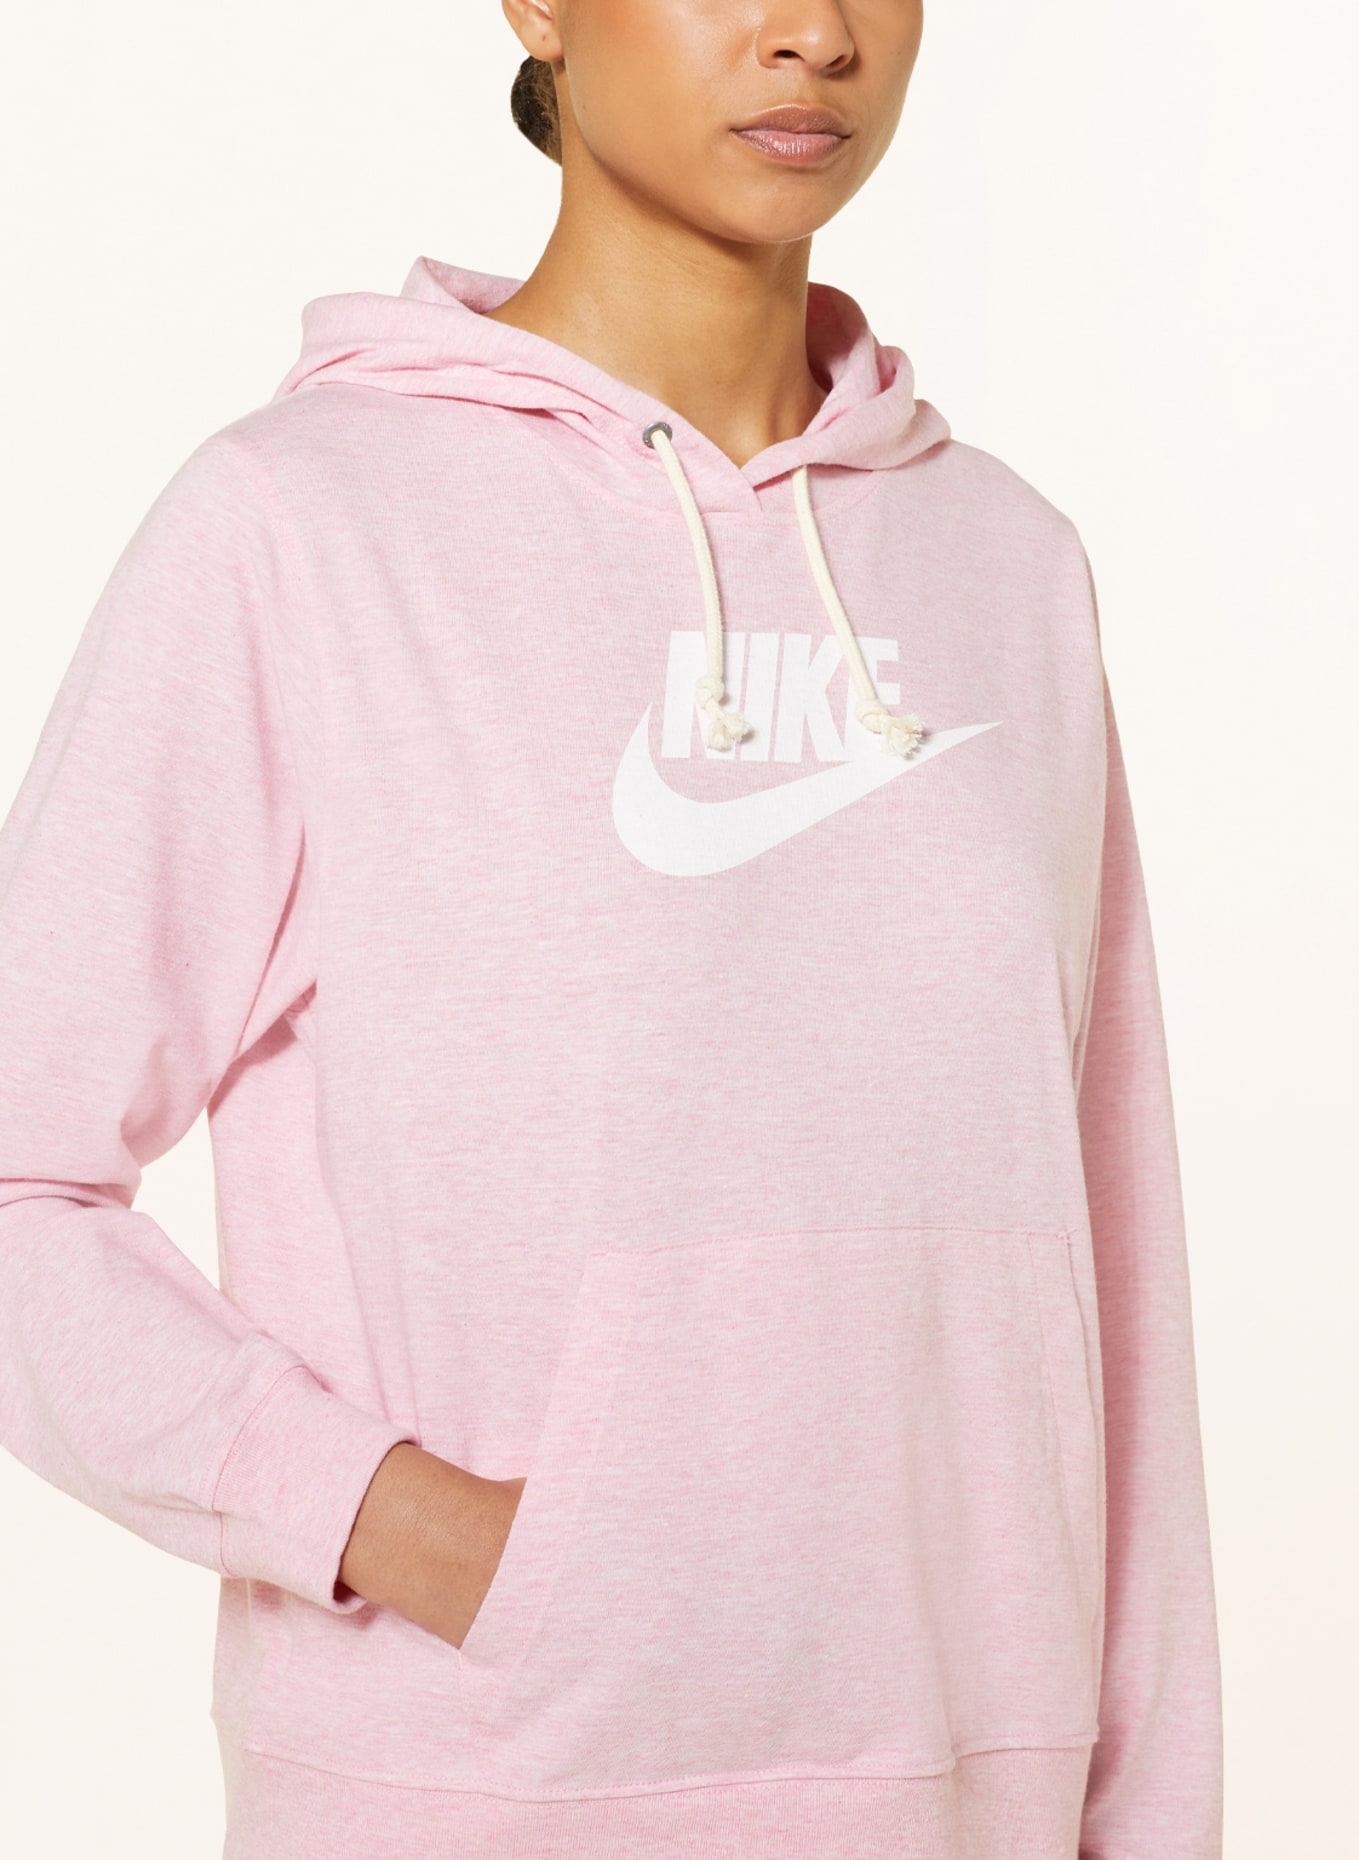 Hot Pink Nike Hoodie For Womens